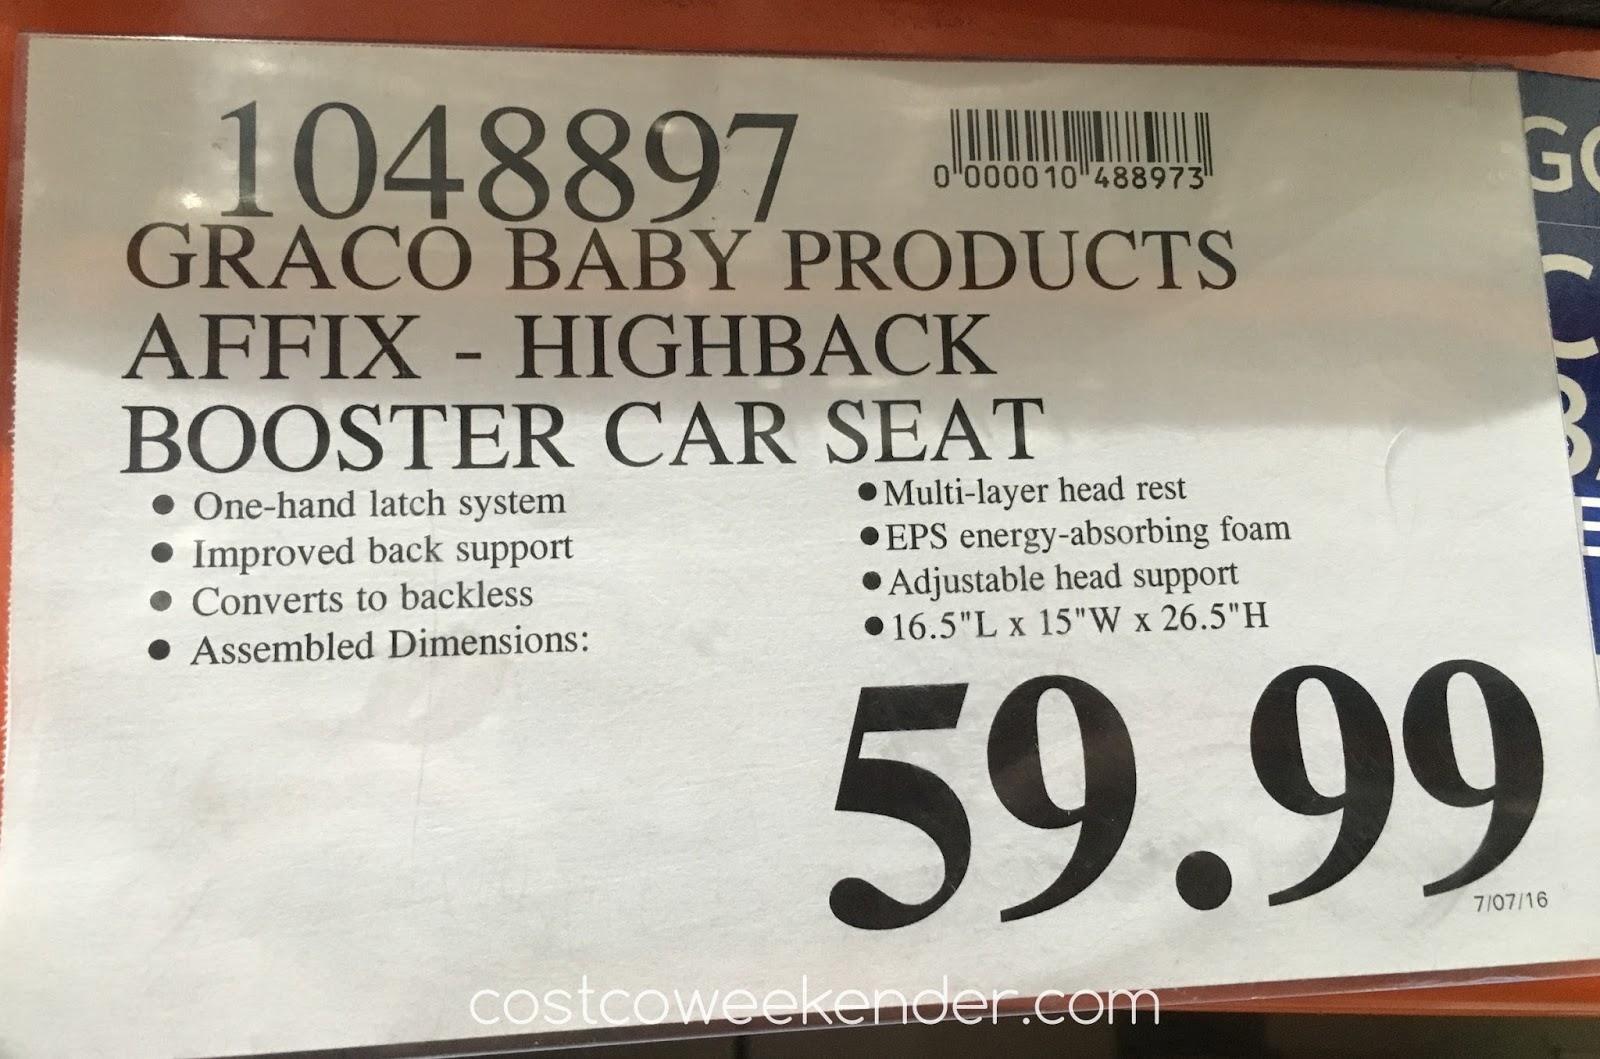 graco-affix-highback-booster-car-seat-with-latch-system-costco-weekender